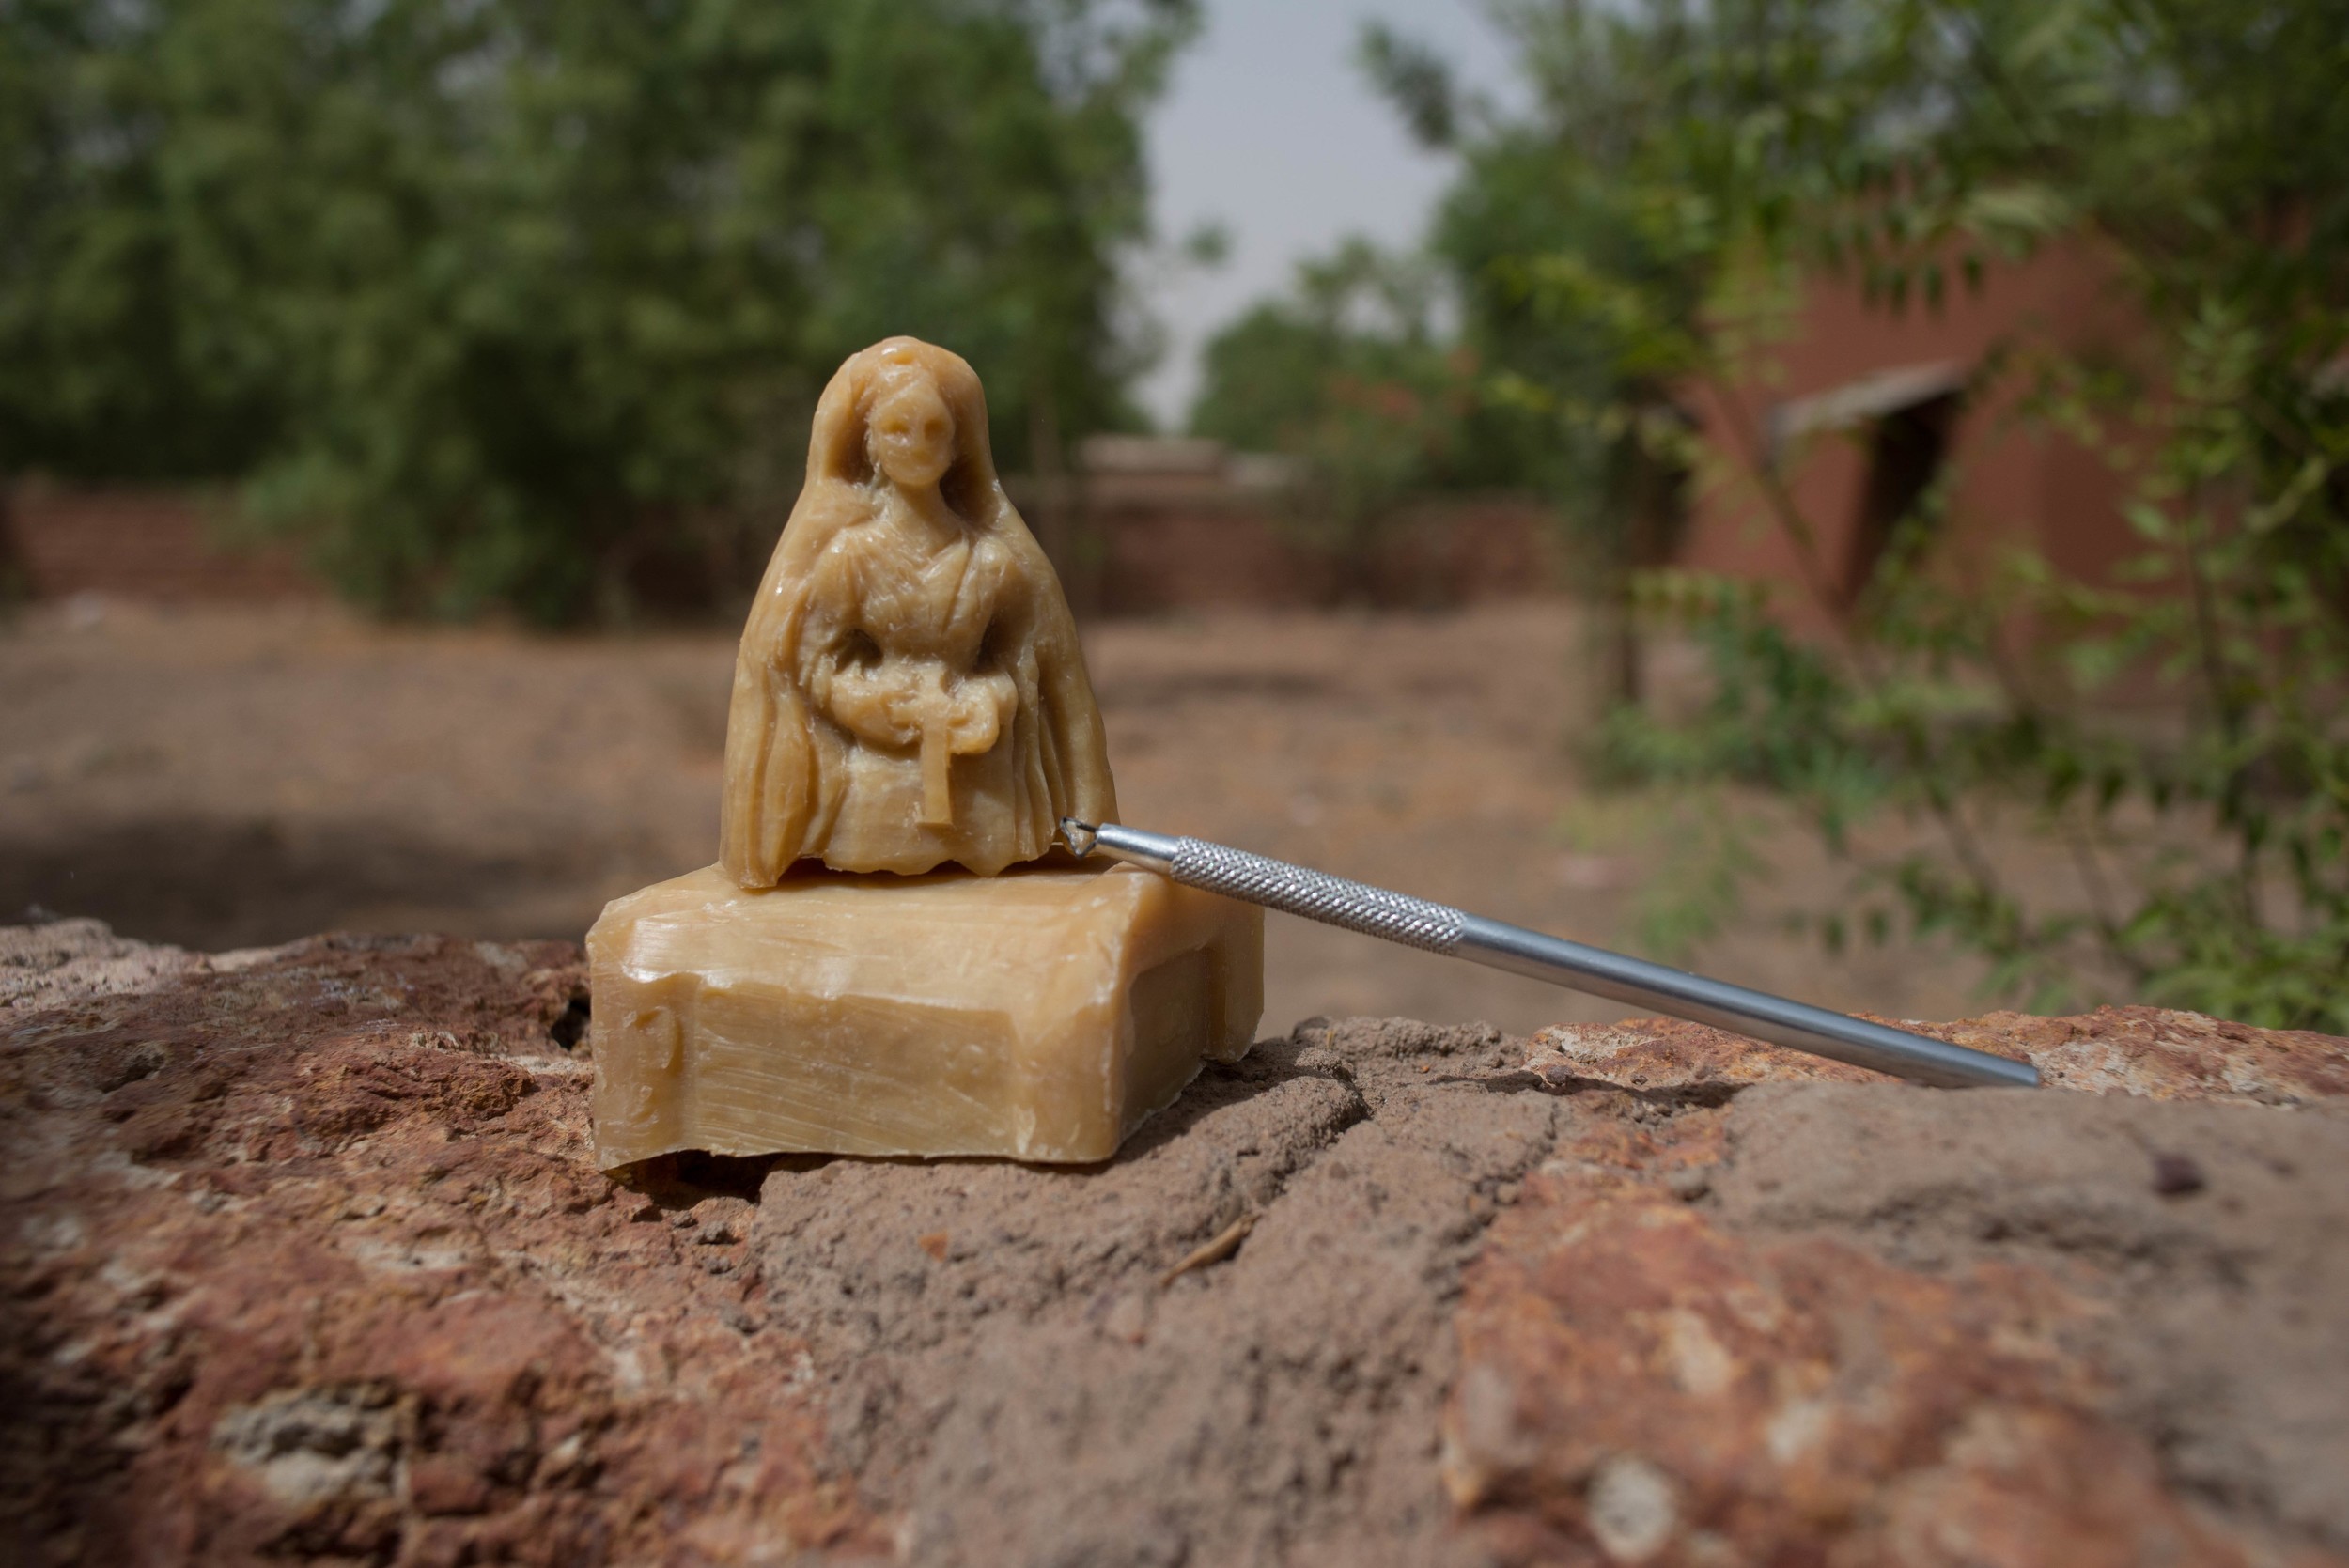  A soap figurine with Mary holding a cross.&nbsp; 